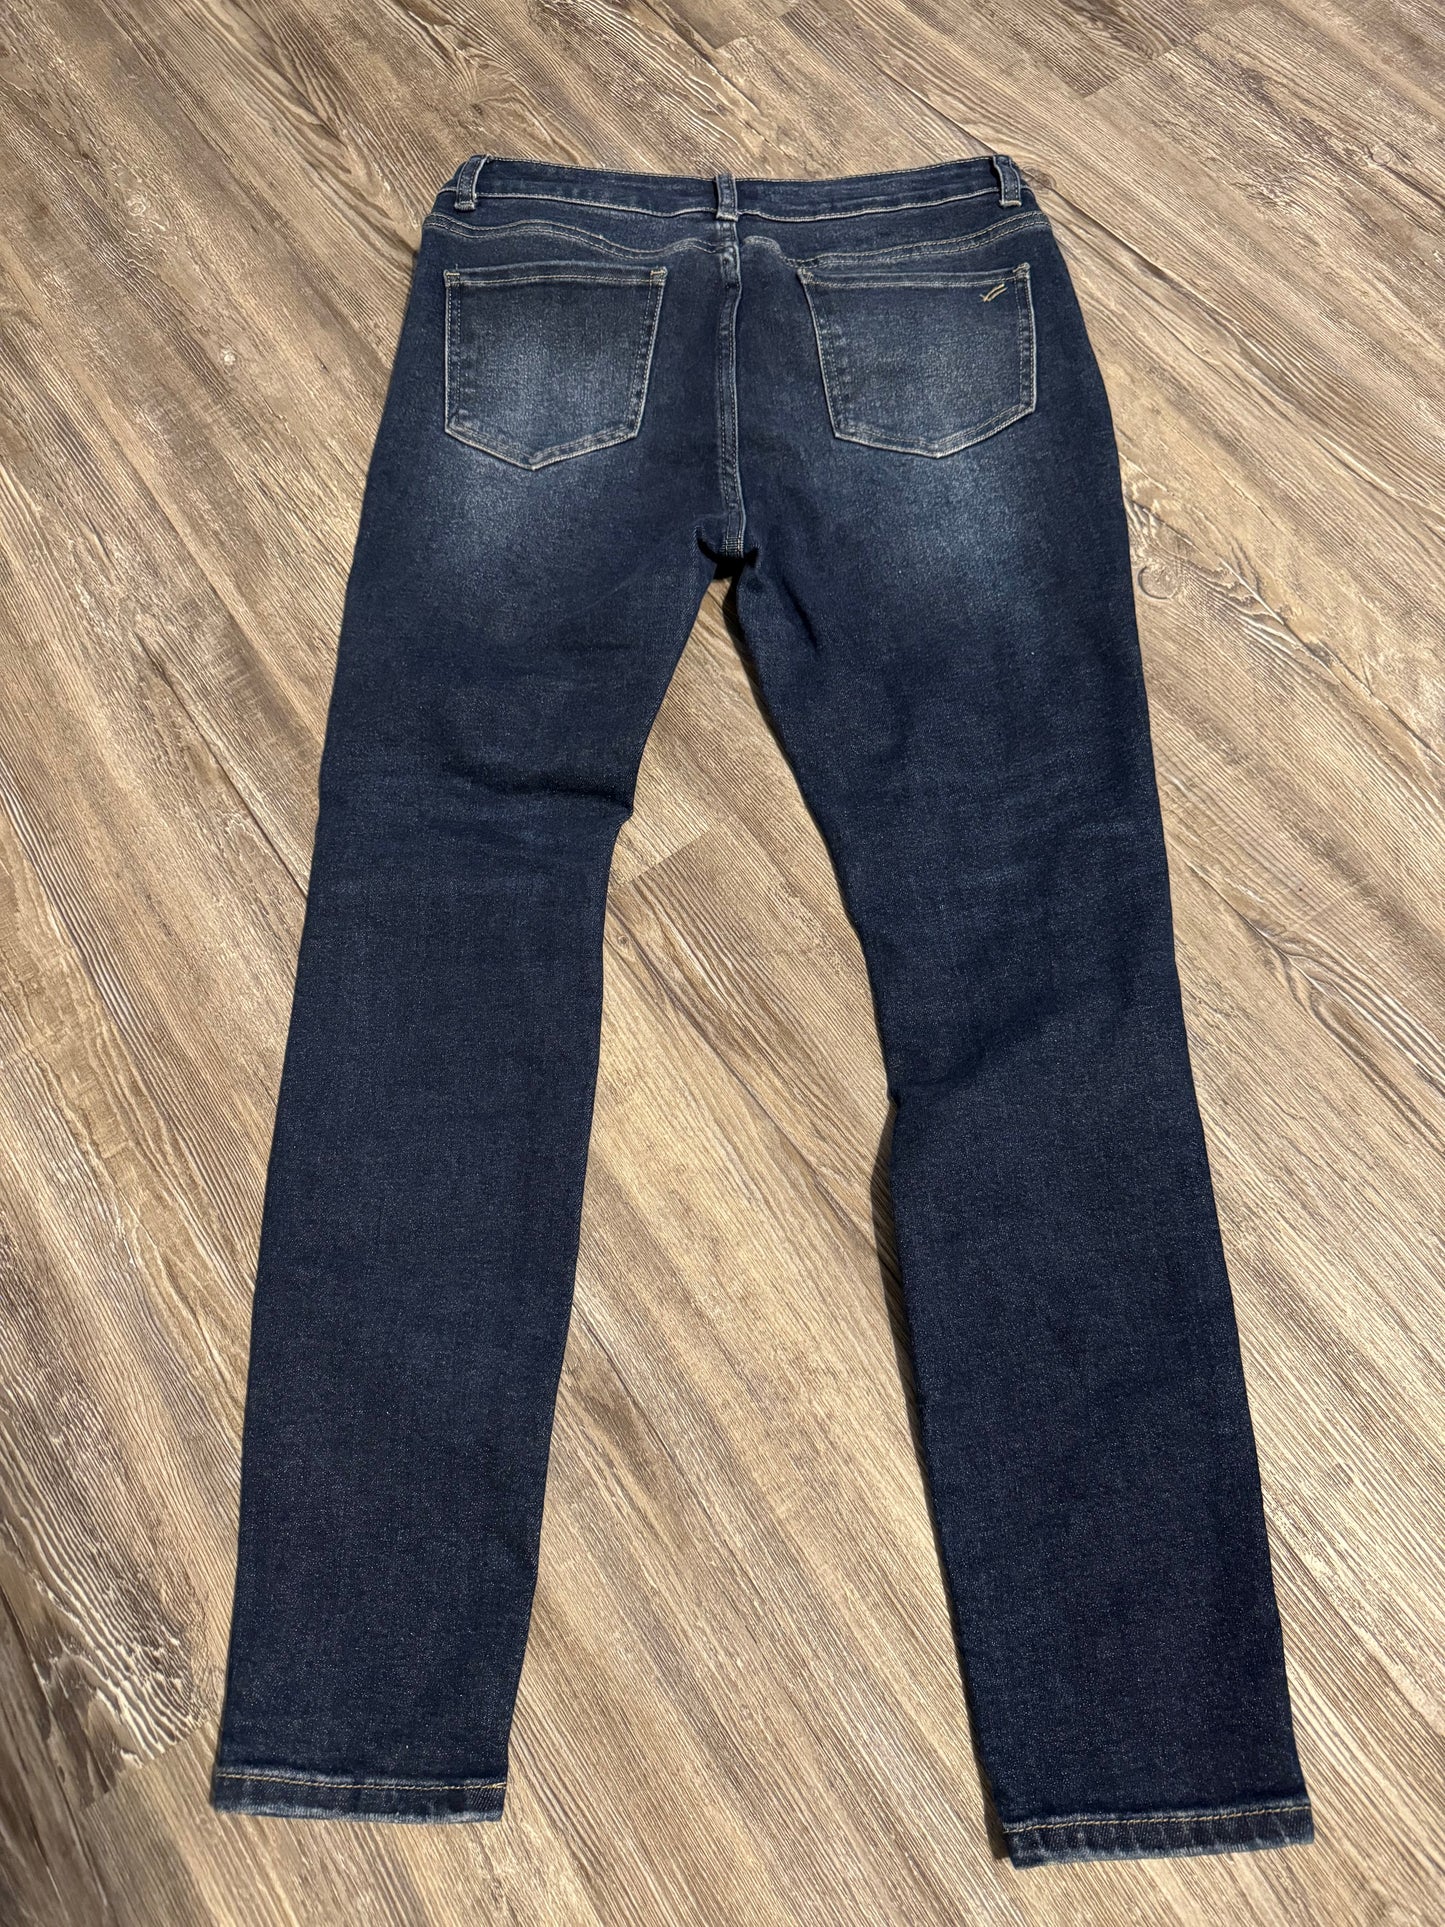 Jeans Relaxed/boyfriend By William Rast  Size: 8